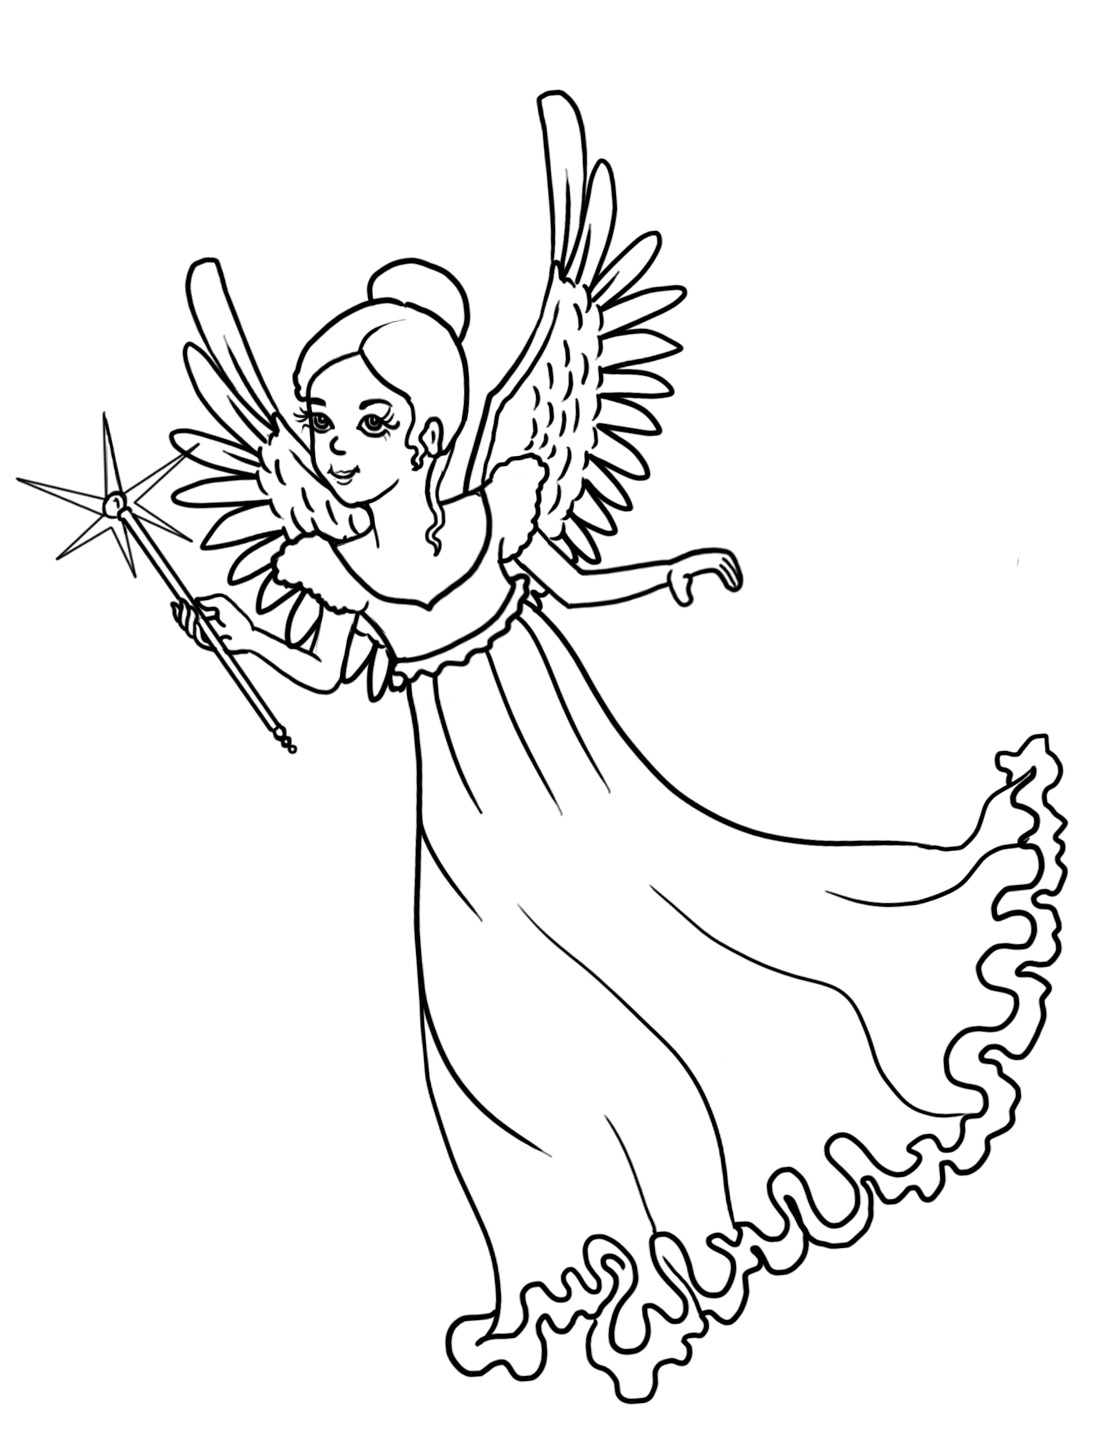 Tinker Angel Coloring Page